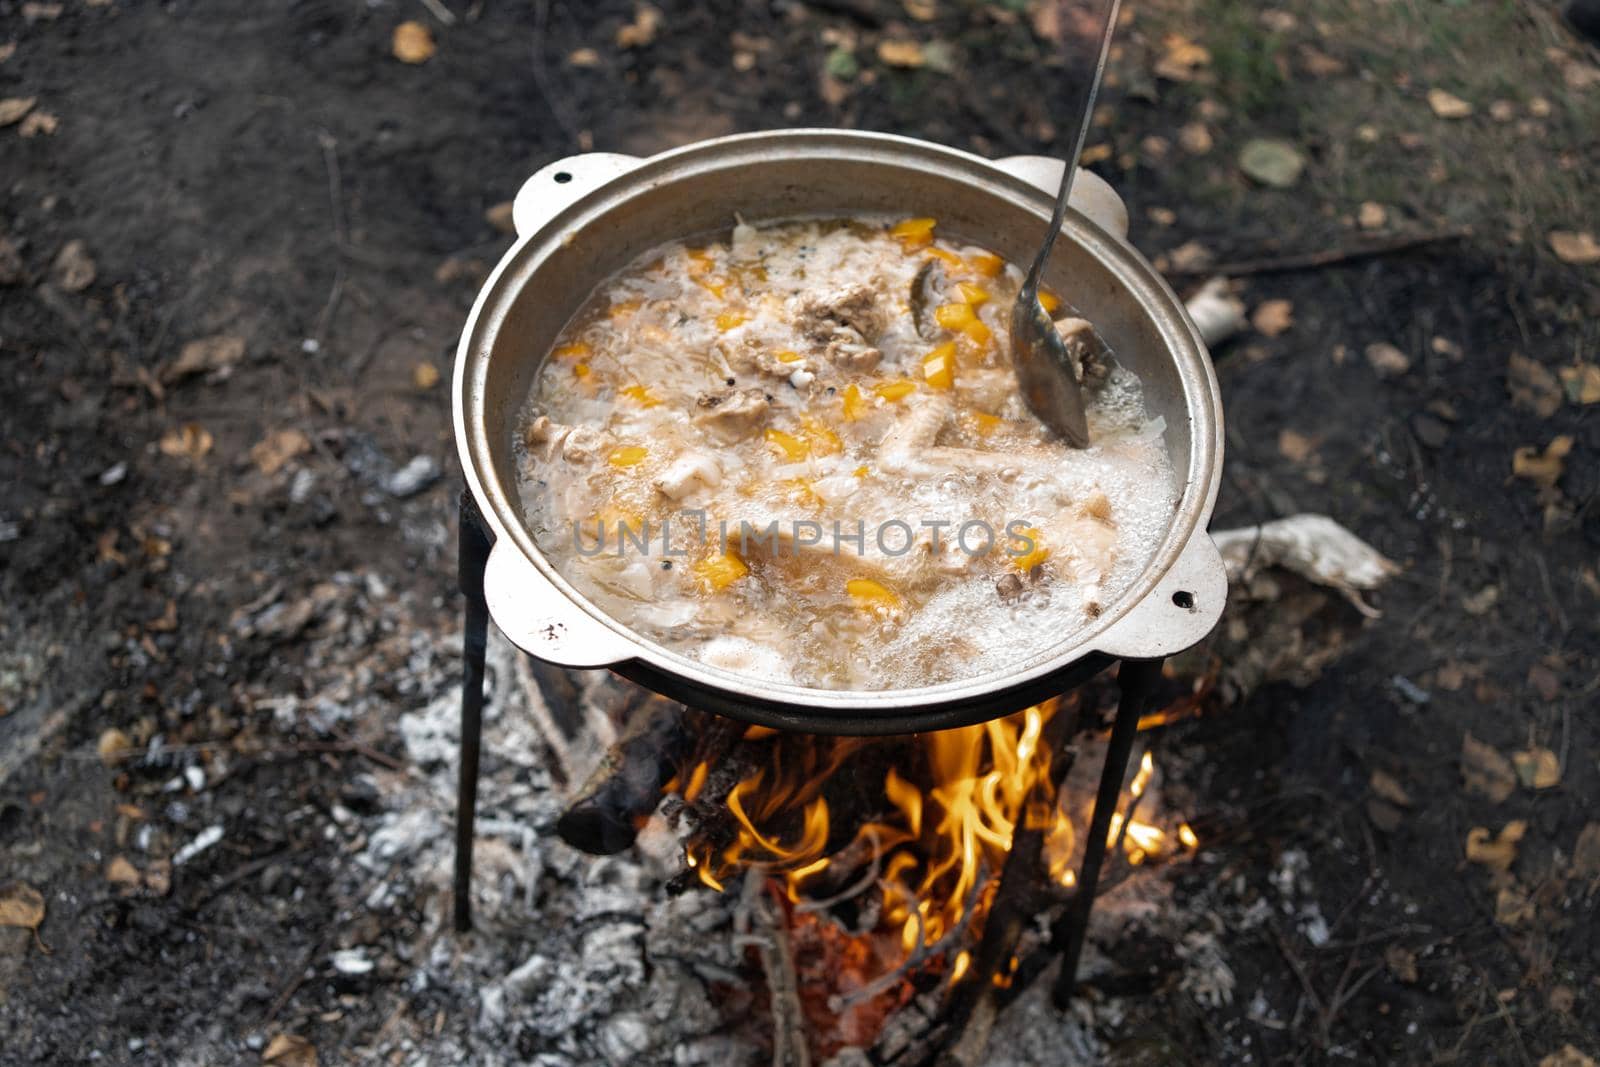 a cauldron with boiling chicken chowder made of chicken wings and vegetables stands on a fire during outdoor recreation. The soup is stirred with a long spoon by olex